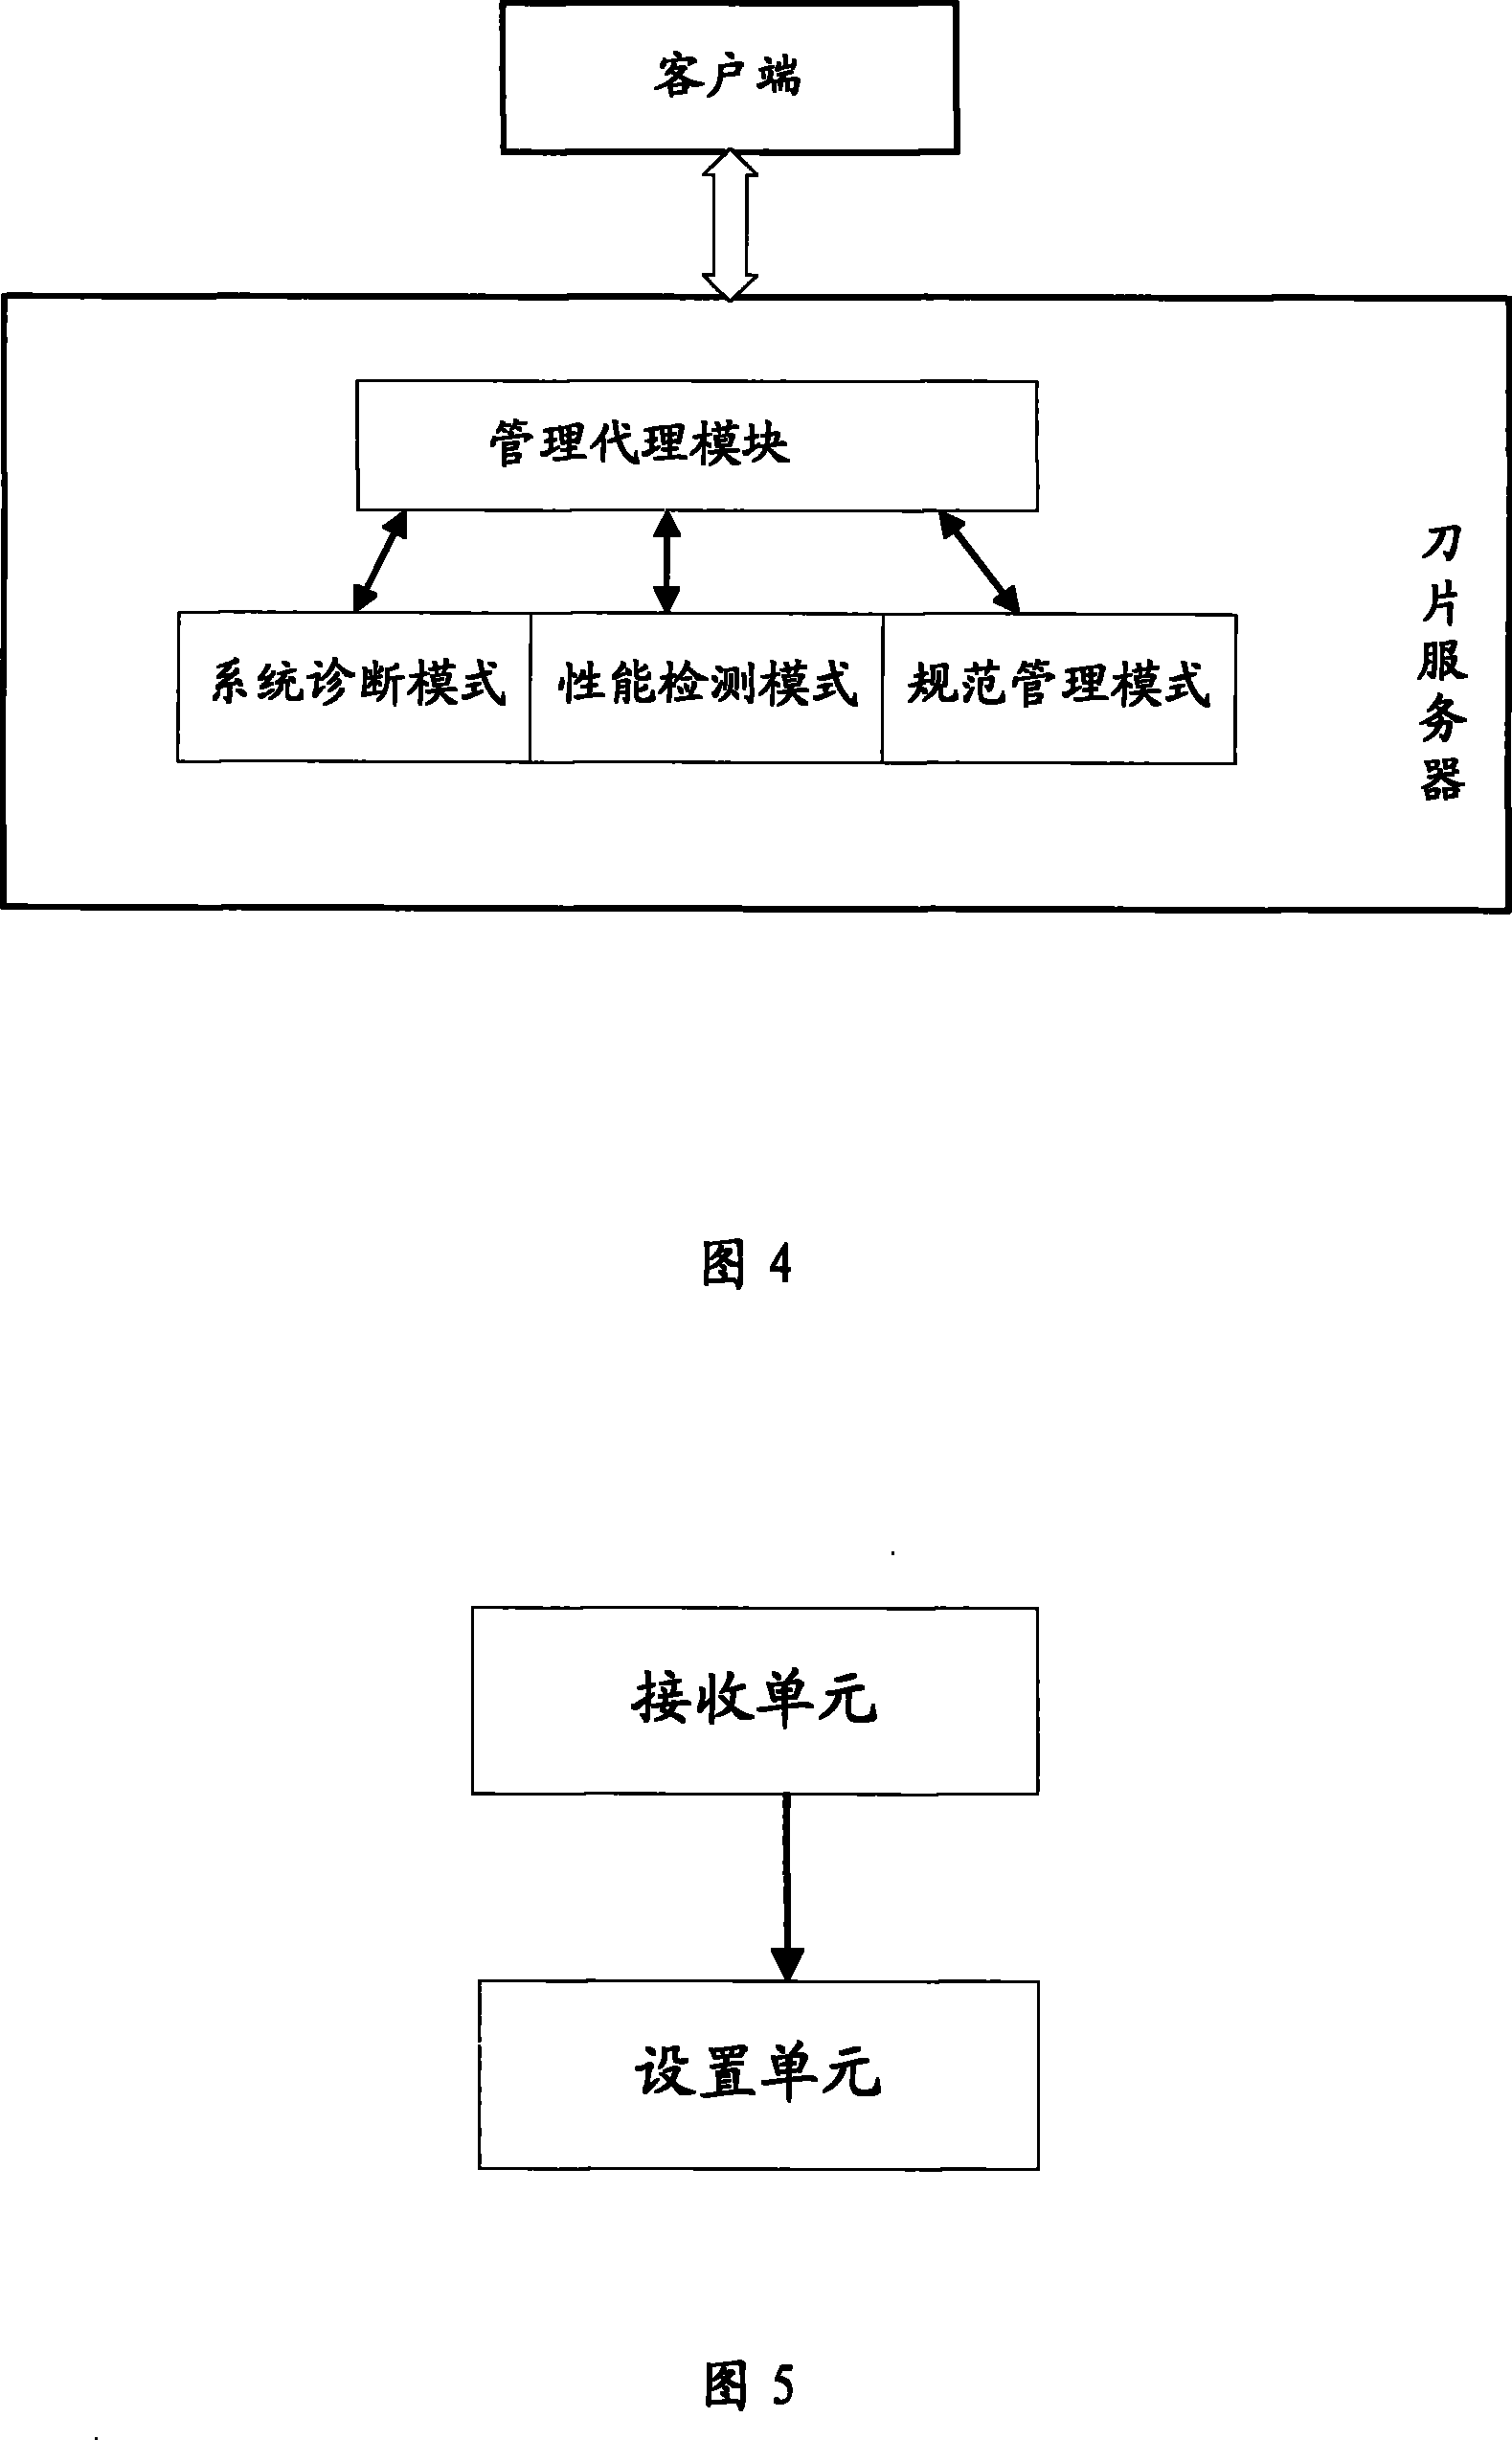 System, apparatus and method for managing network device